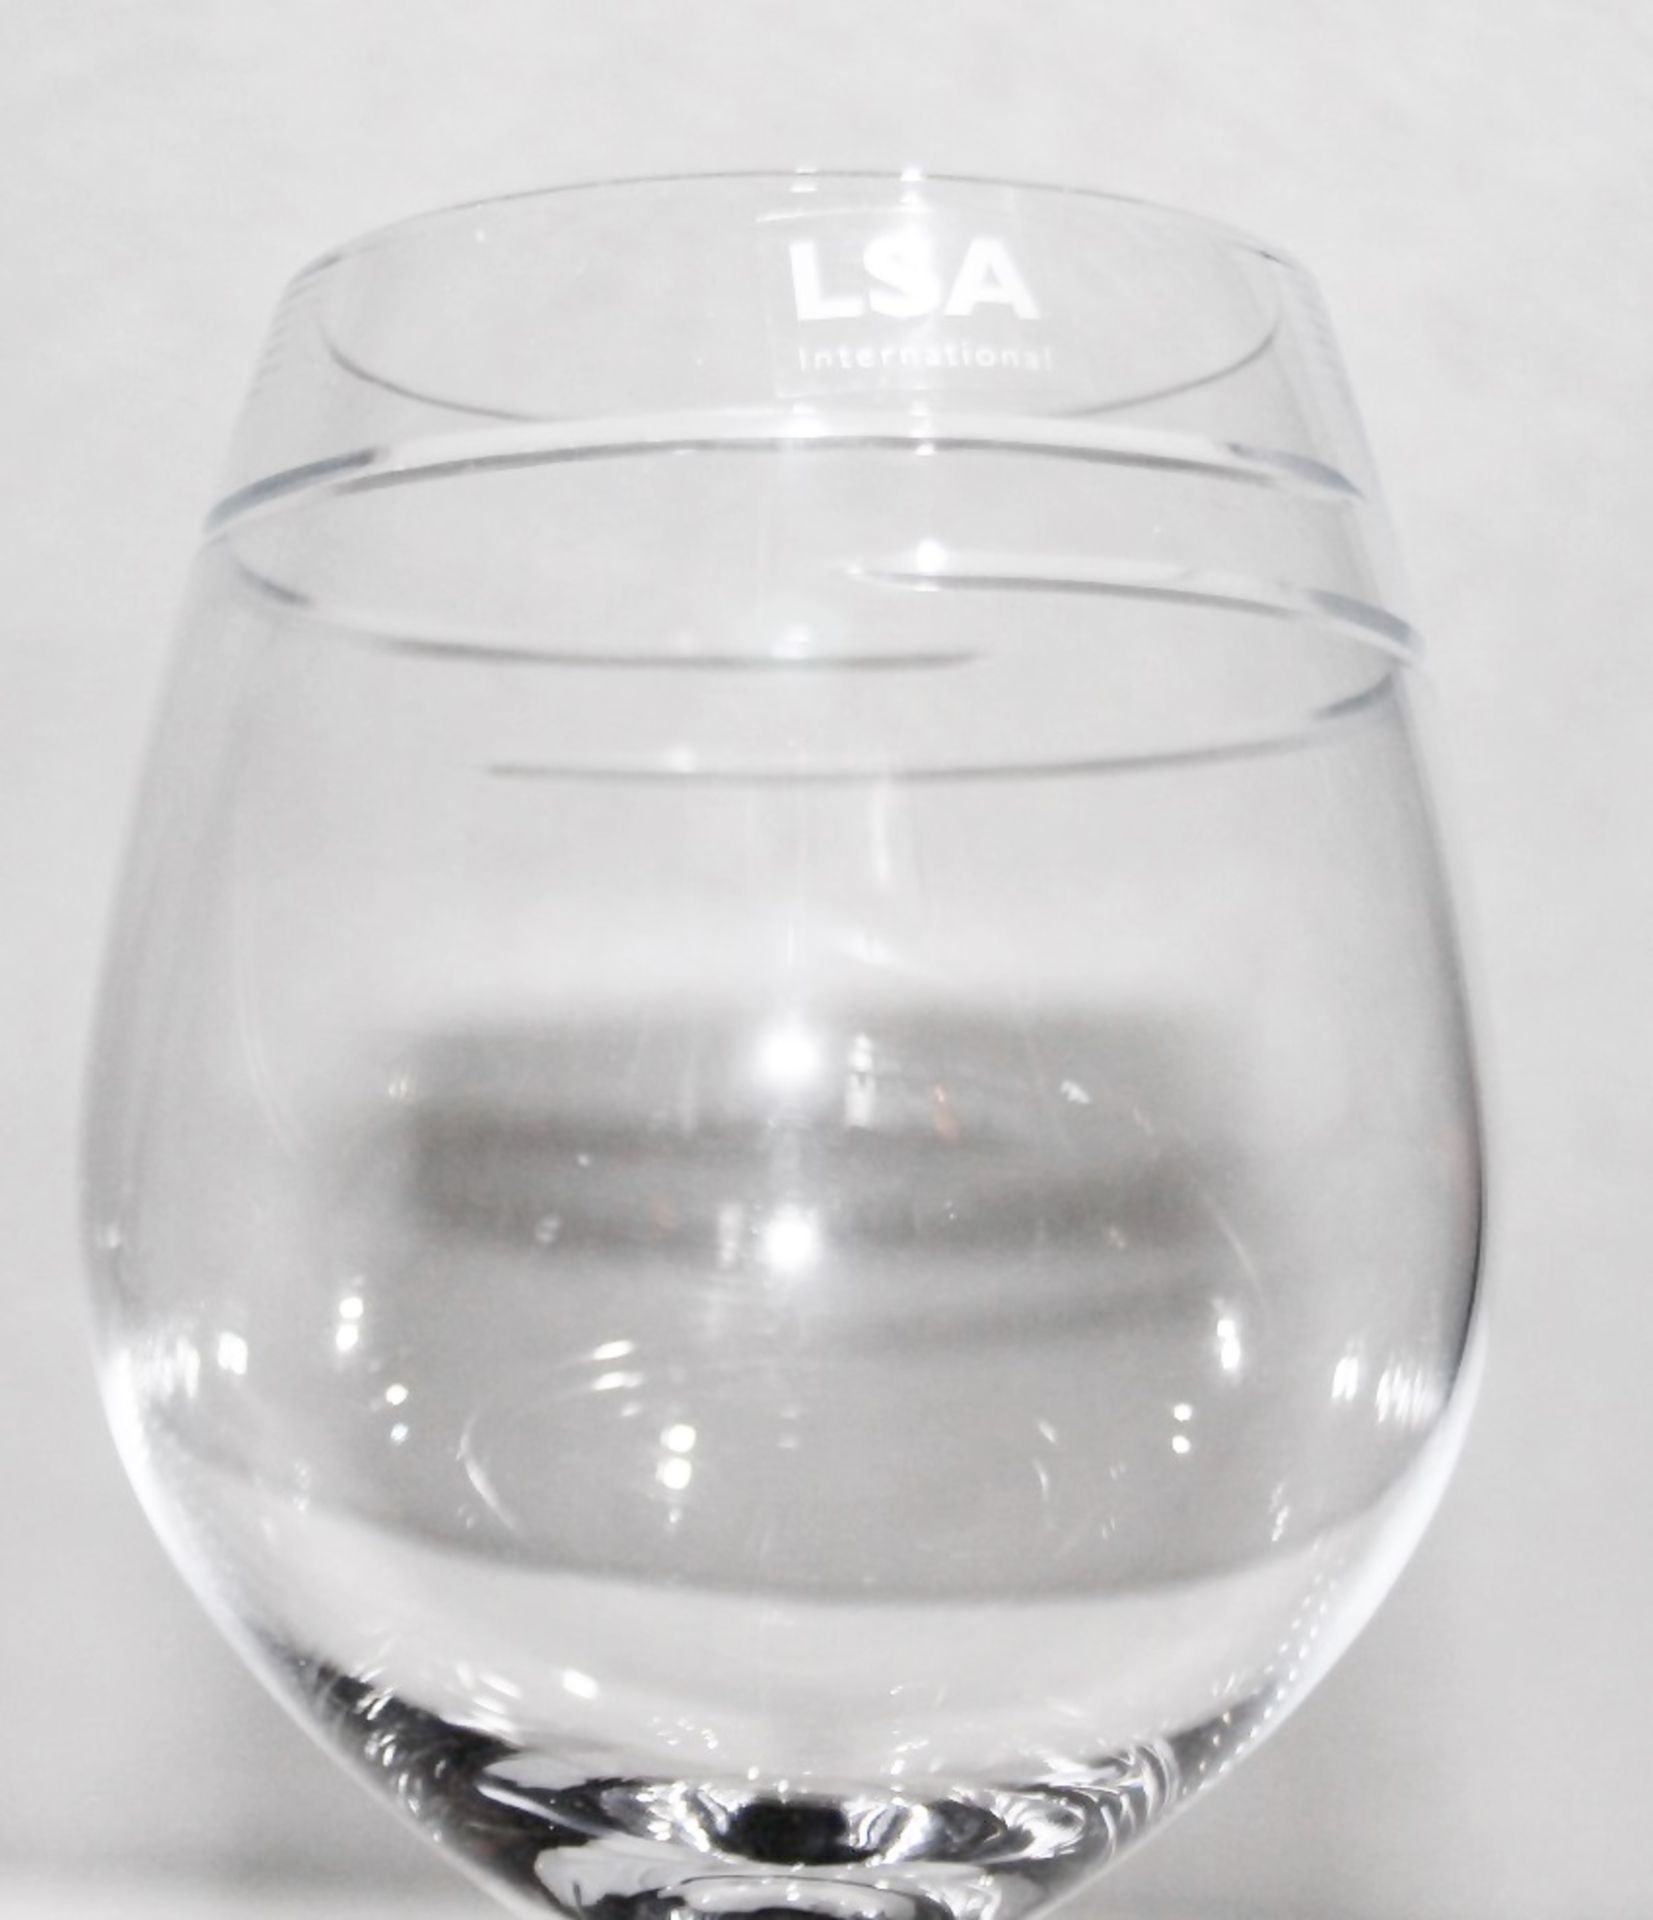 1 x LSA INTERNATIONAL 'Verso' Designer Mouthblown Red Wine Glass (750ml) - Unused Boxed Stock - Image 2 of 5